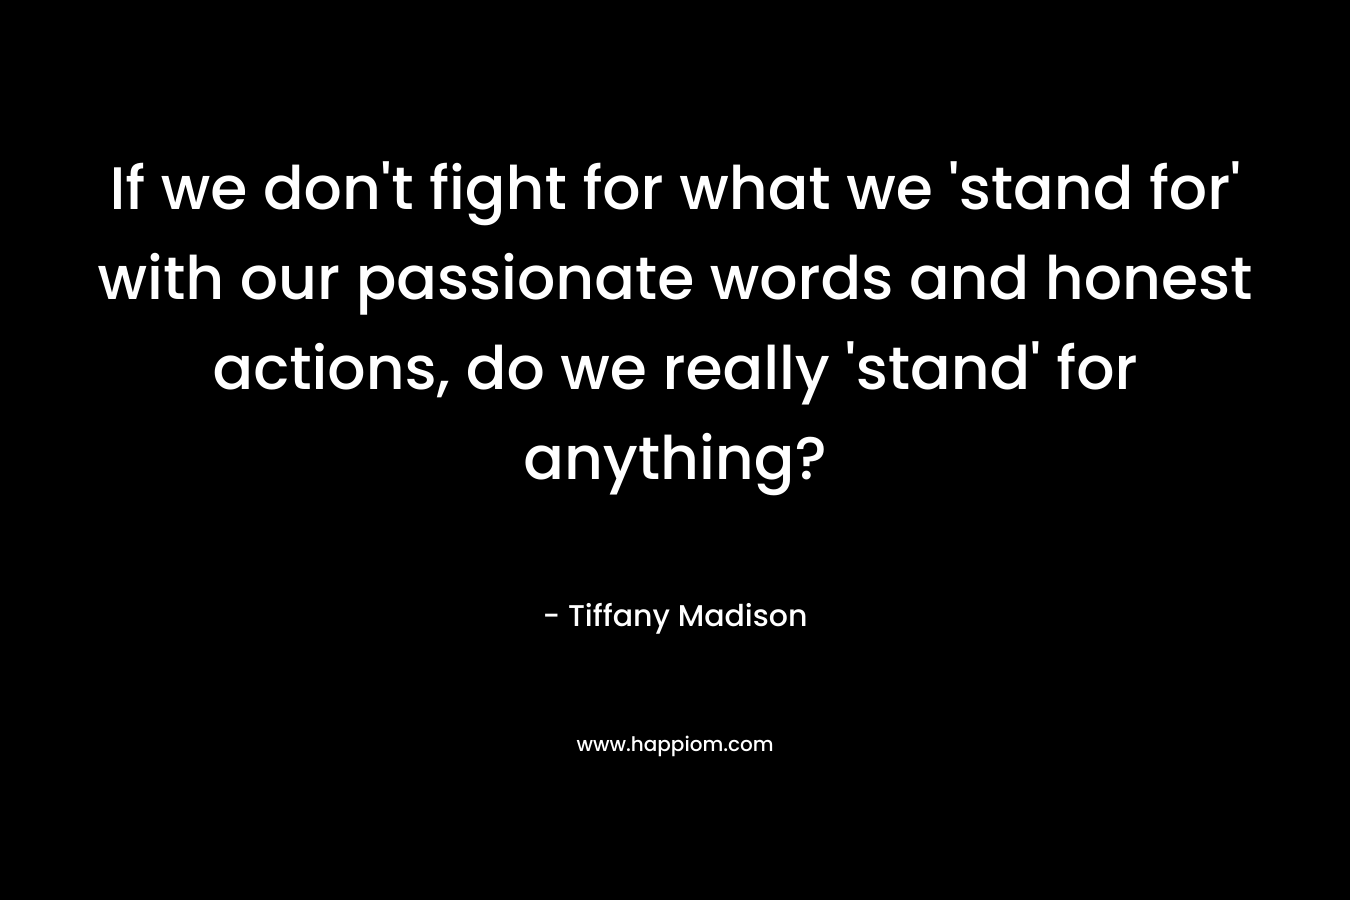 If we don't fight for what we 'stand for' with our passionate words and honest actions, do we really 'stand' for anything?